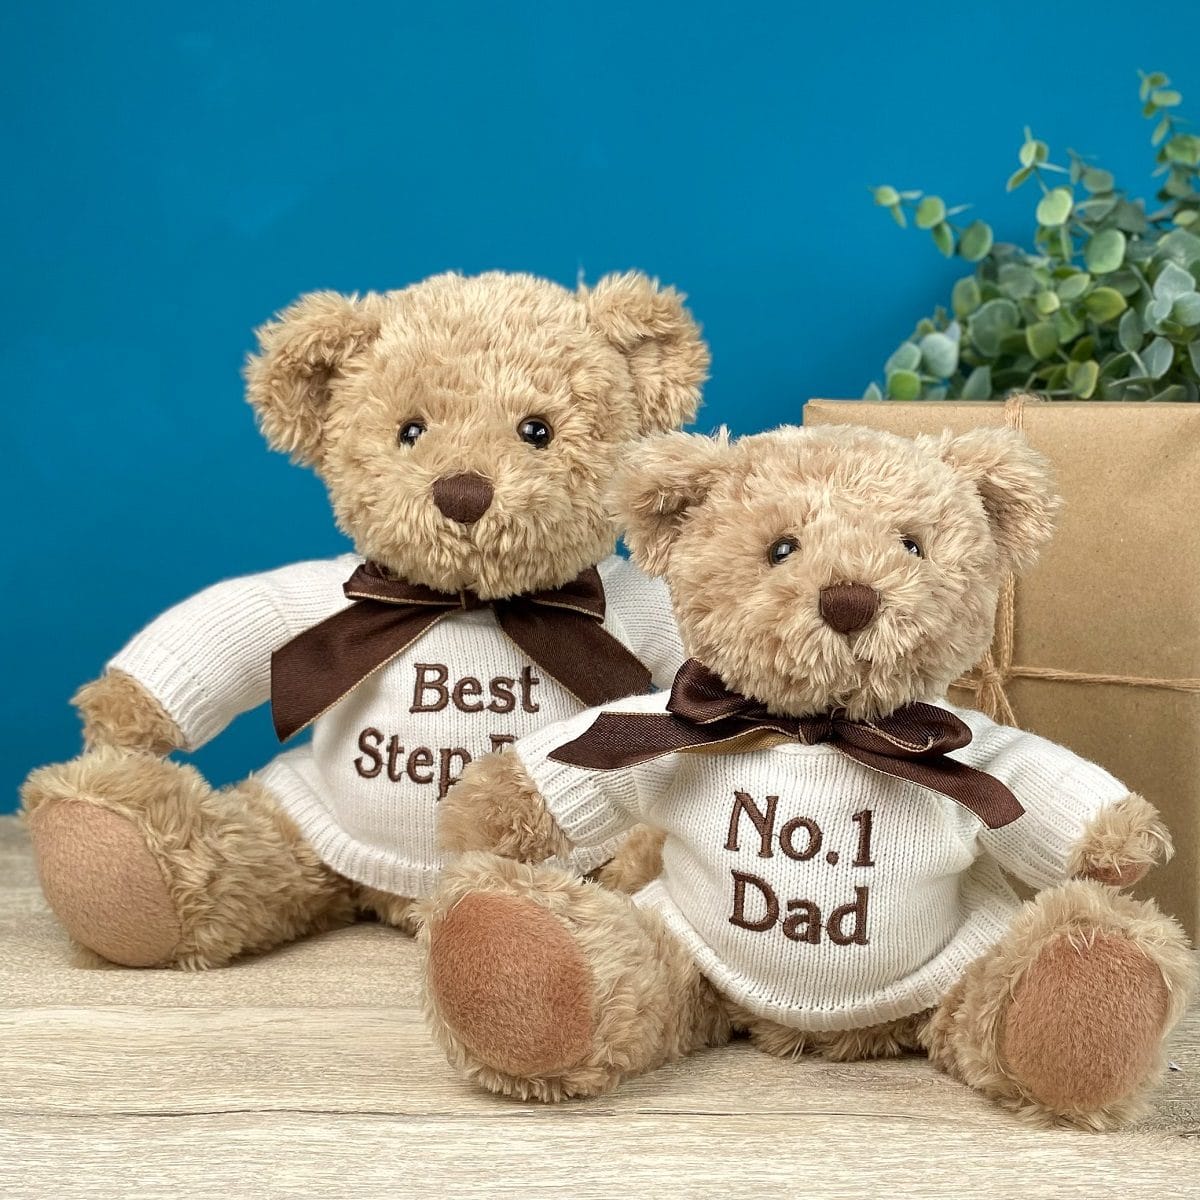 Father's Day Keel sherwood large teddy bear soft toy